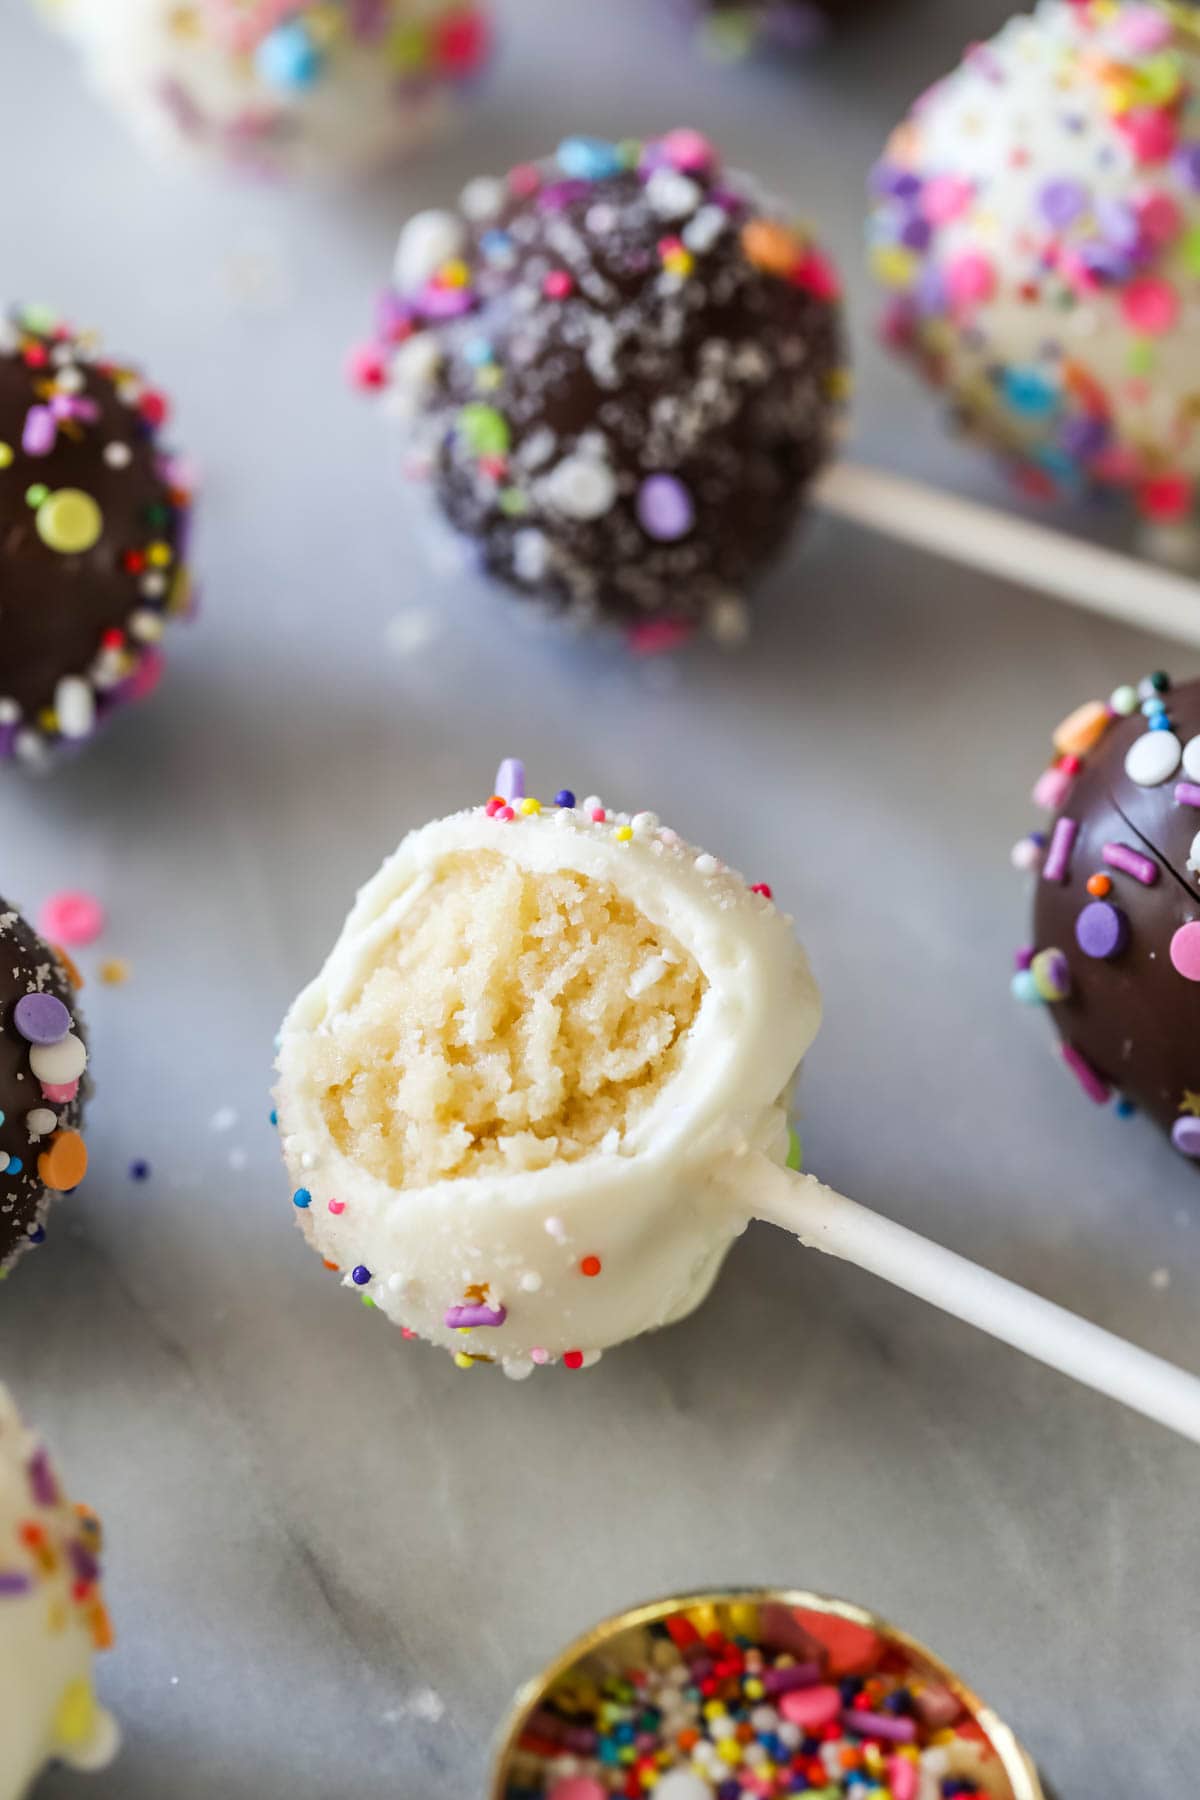 Candy coated cake balls on sticks with one bitten to show a yellow cake interior.